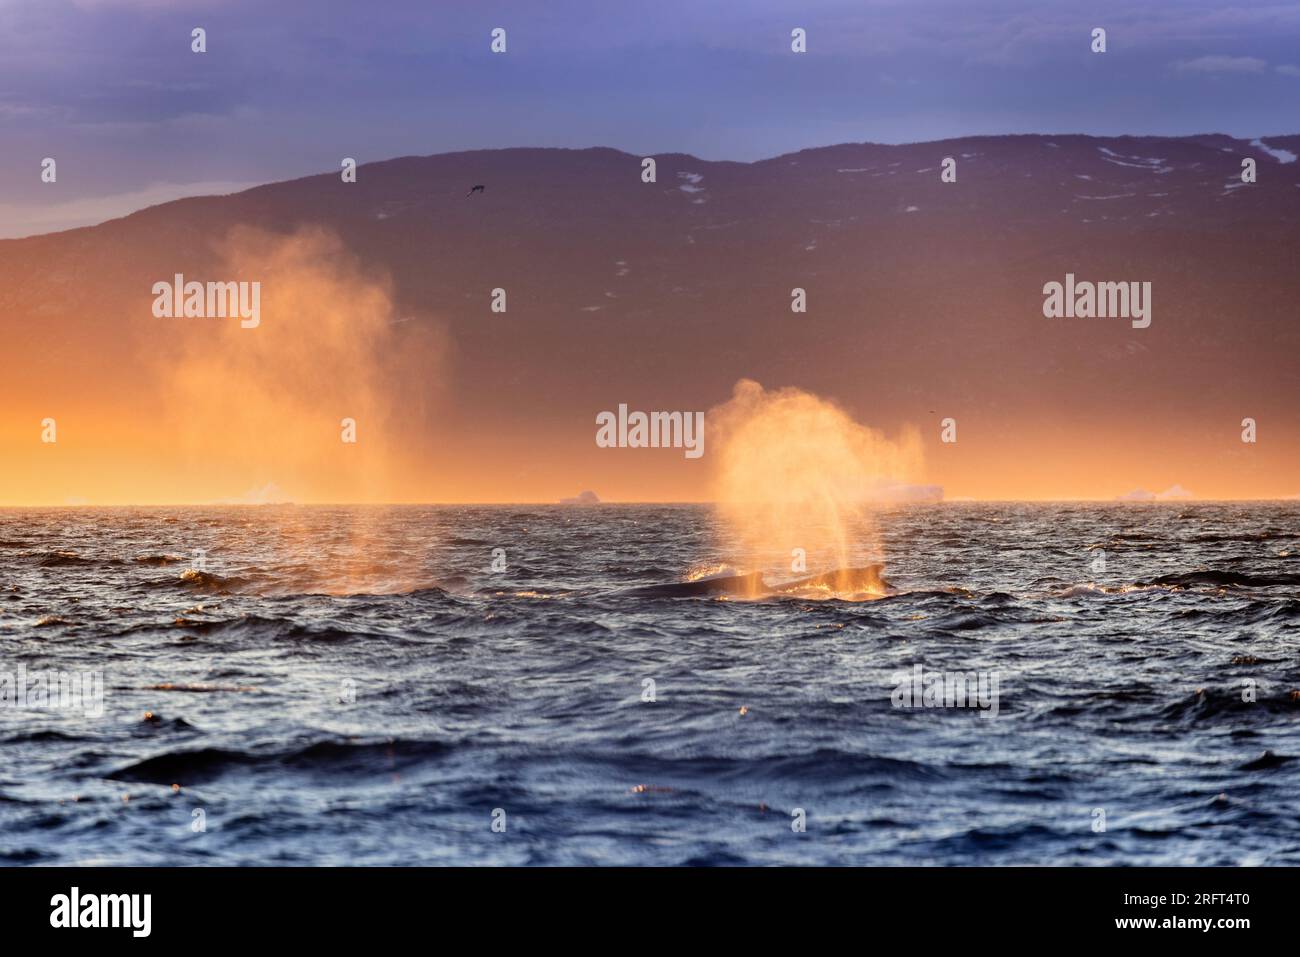 Humpback whales blow mist against sunset light in Qeqertarsuup Tunua waters, Disko Bay, Greenland Stock Photo